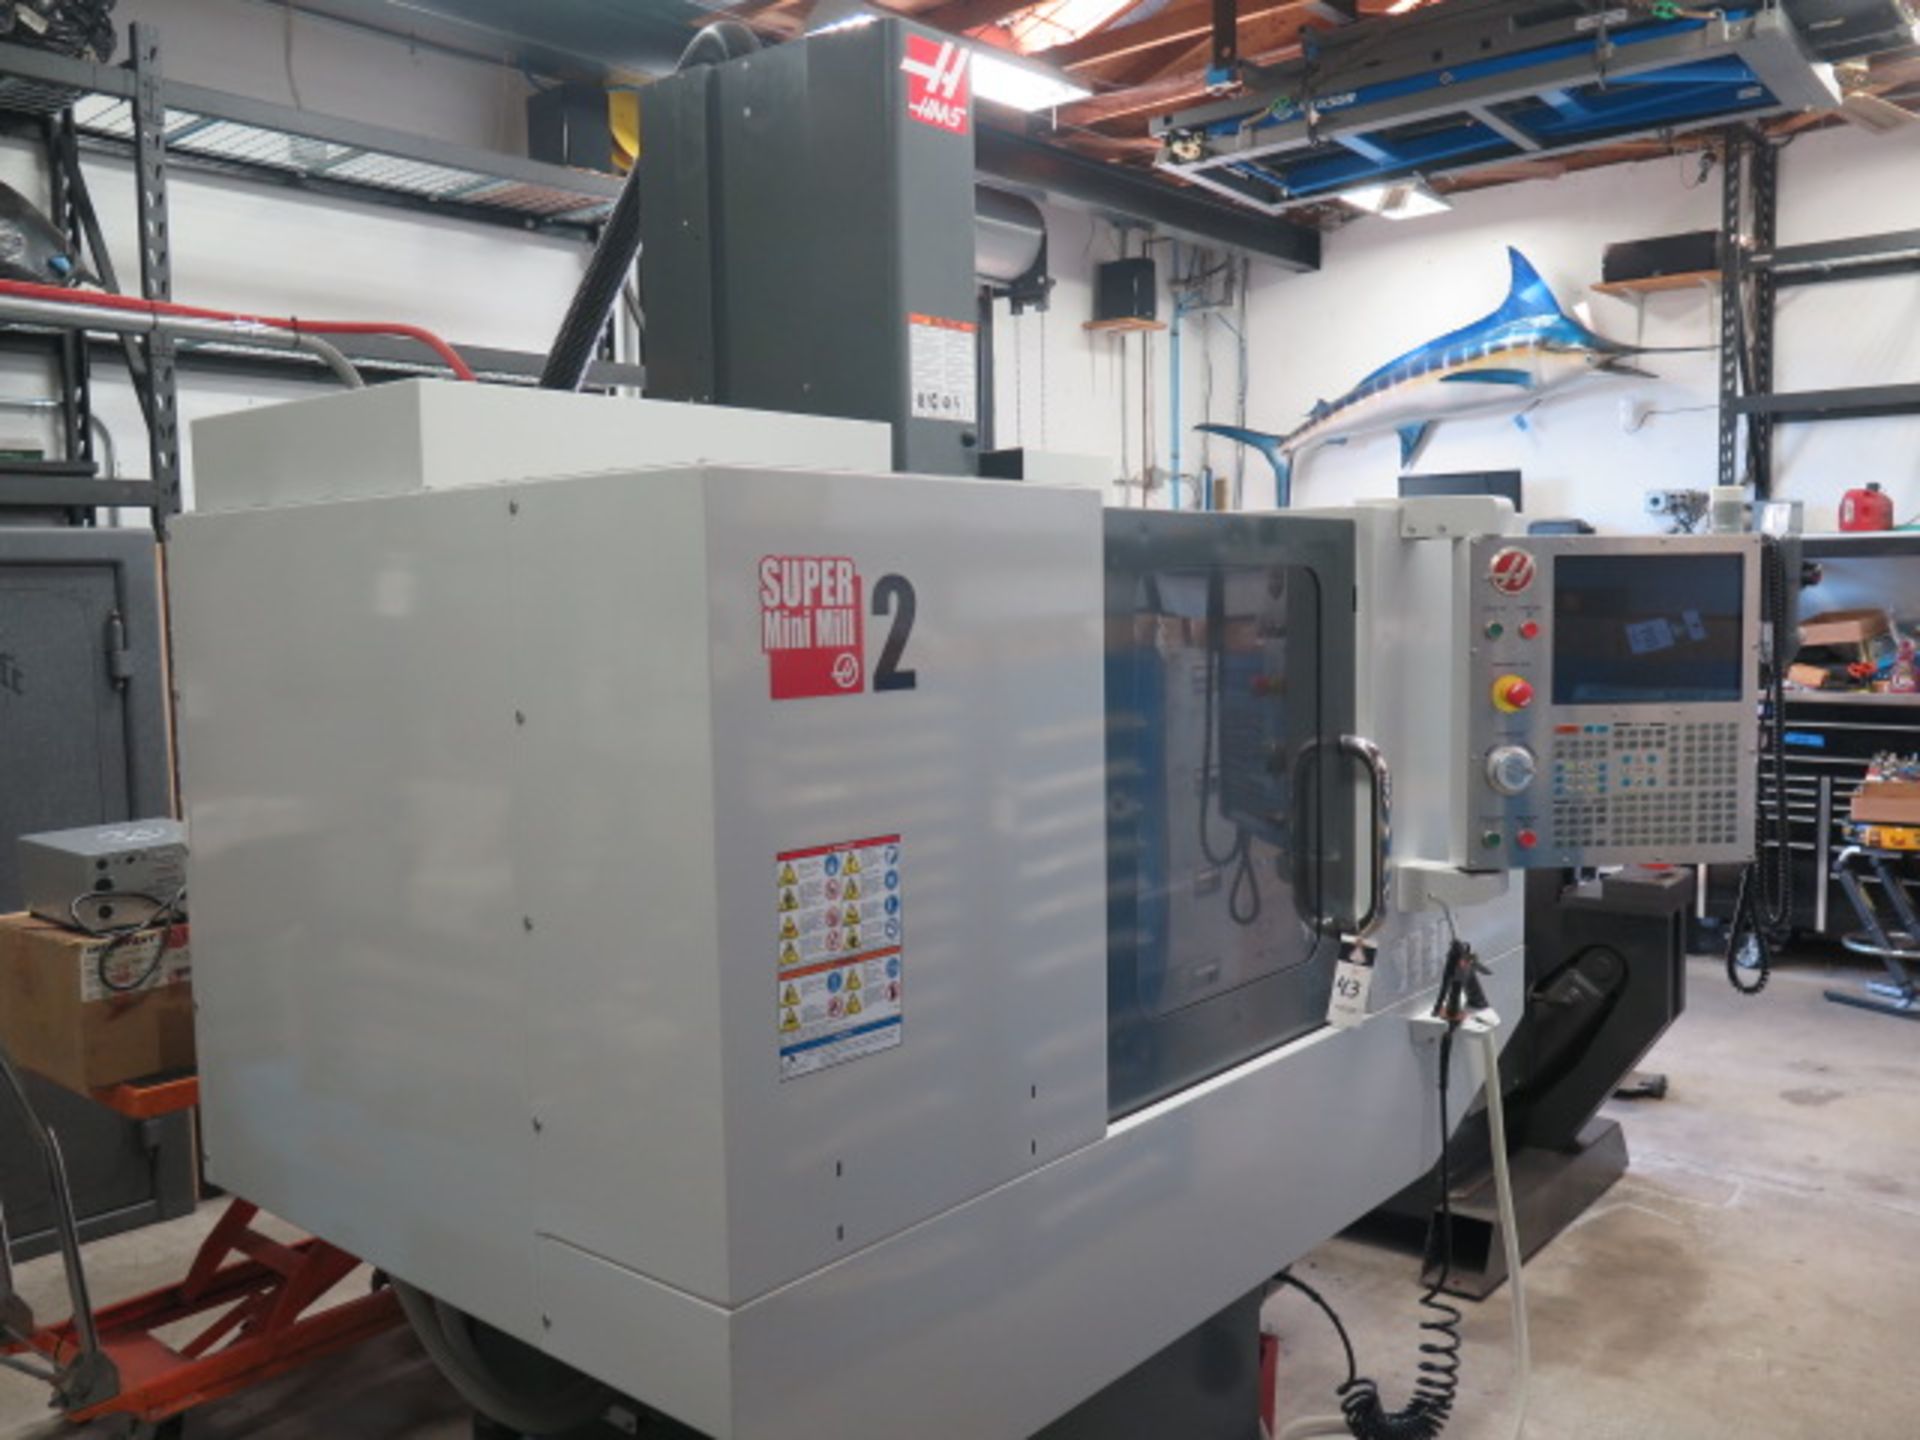 2012 Haas Super Mini Mill 2 4-Axis CNC Vertical Mill s/n 1094547 (NEVER RUN) w/ Haas Controls, 10- - Image 2 of 18